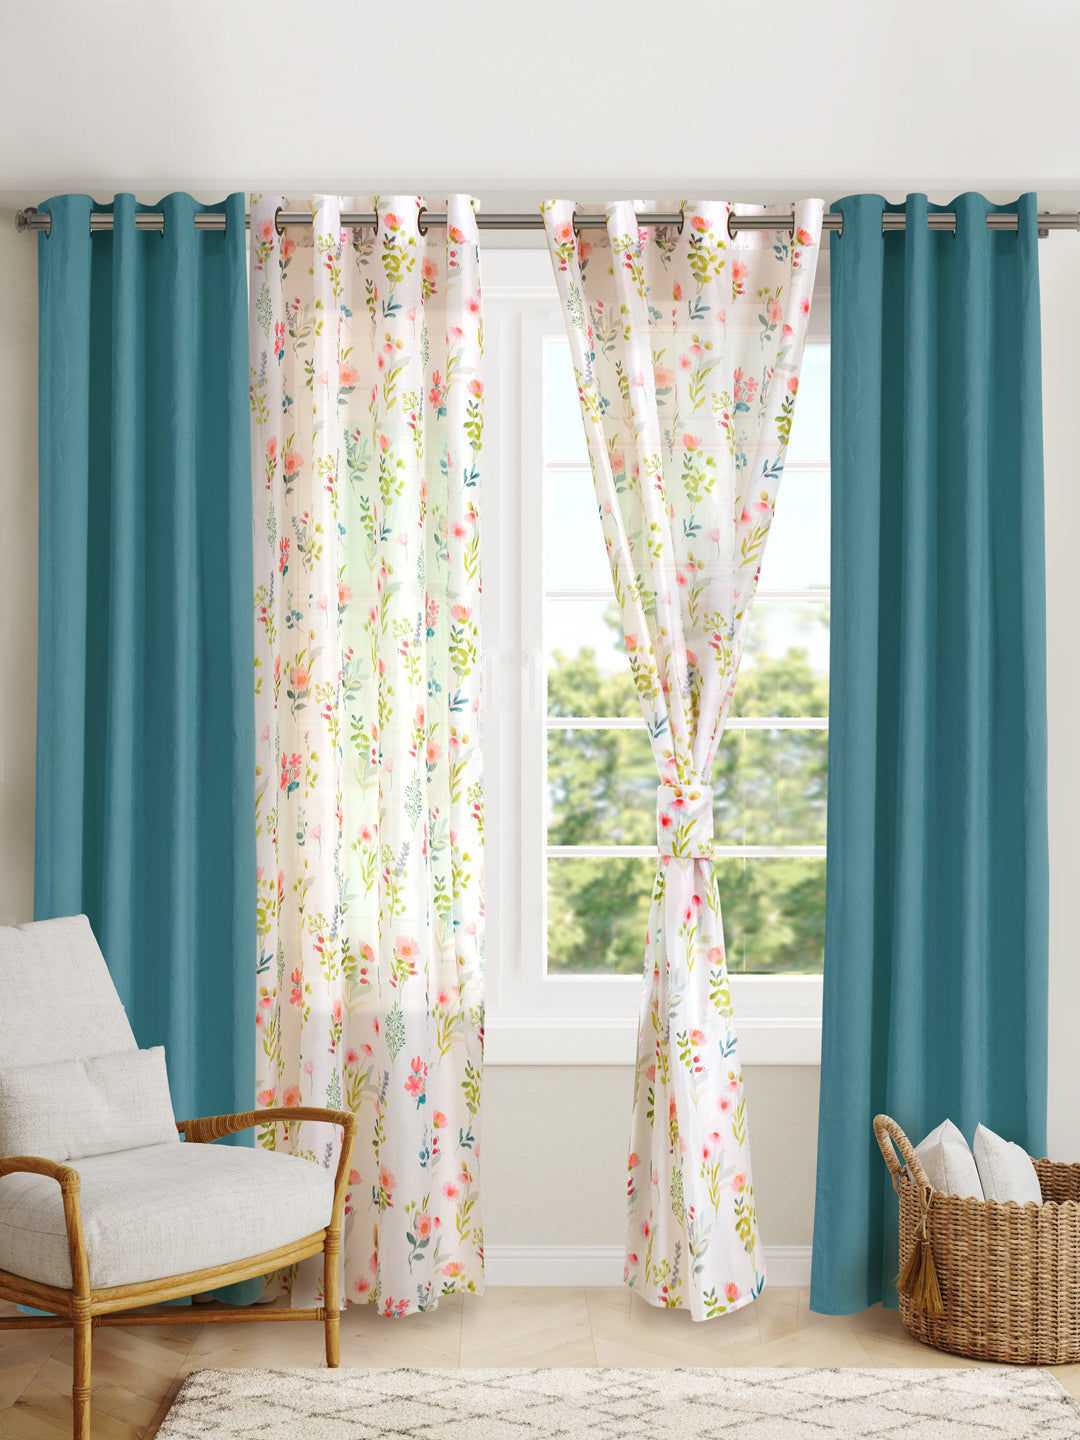 Blanc9 Set Of 4 Flora Printed With Blue Plain 7Ft. Curtains